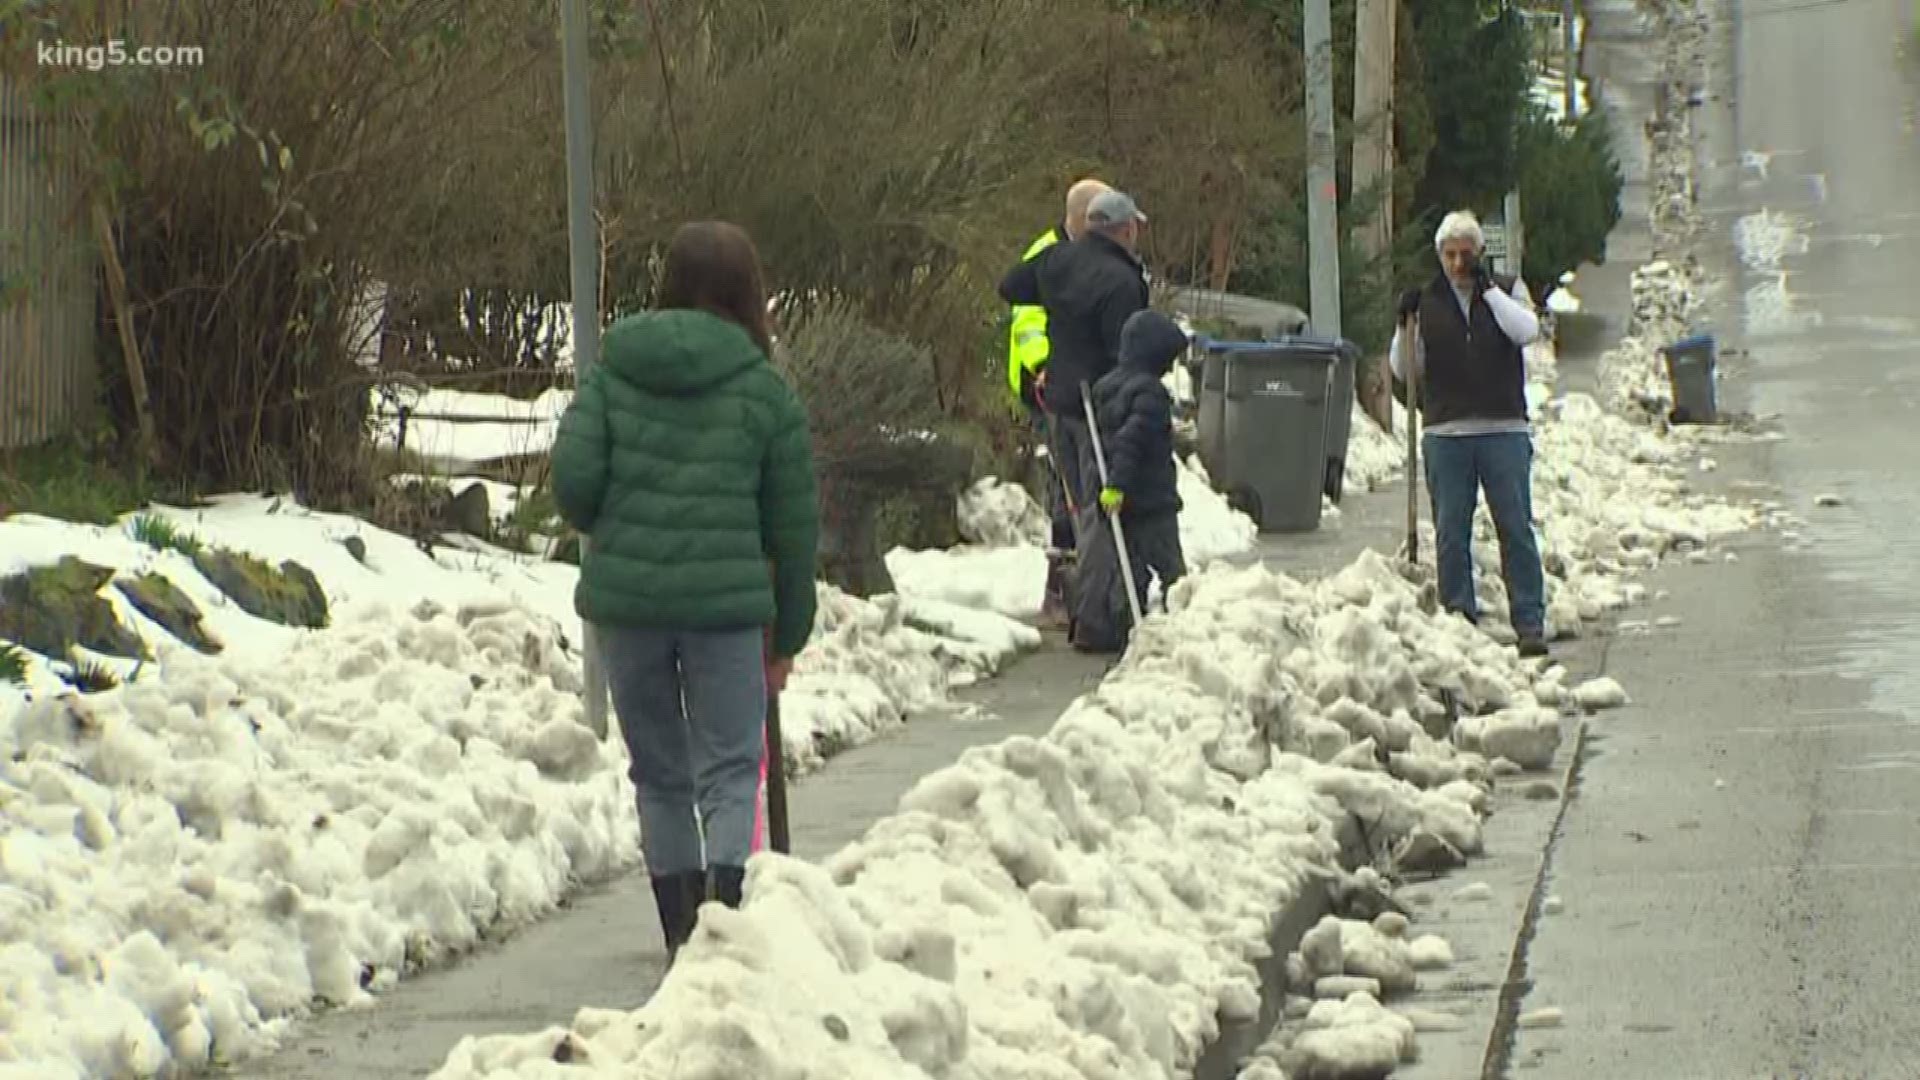 Volunteers cleared sidewalks so students could safely return to school on Tuesday